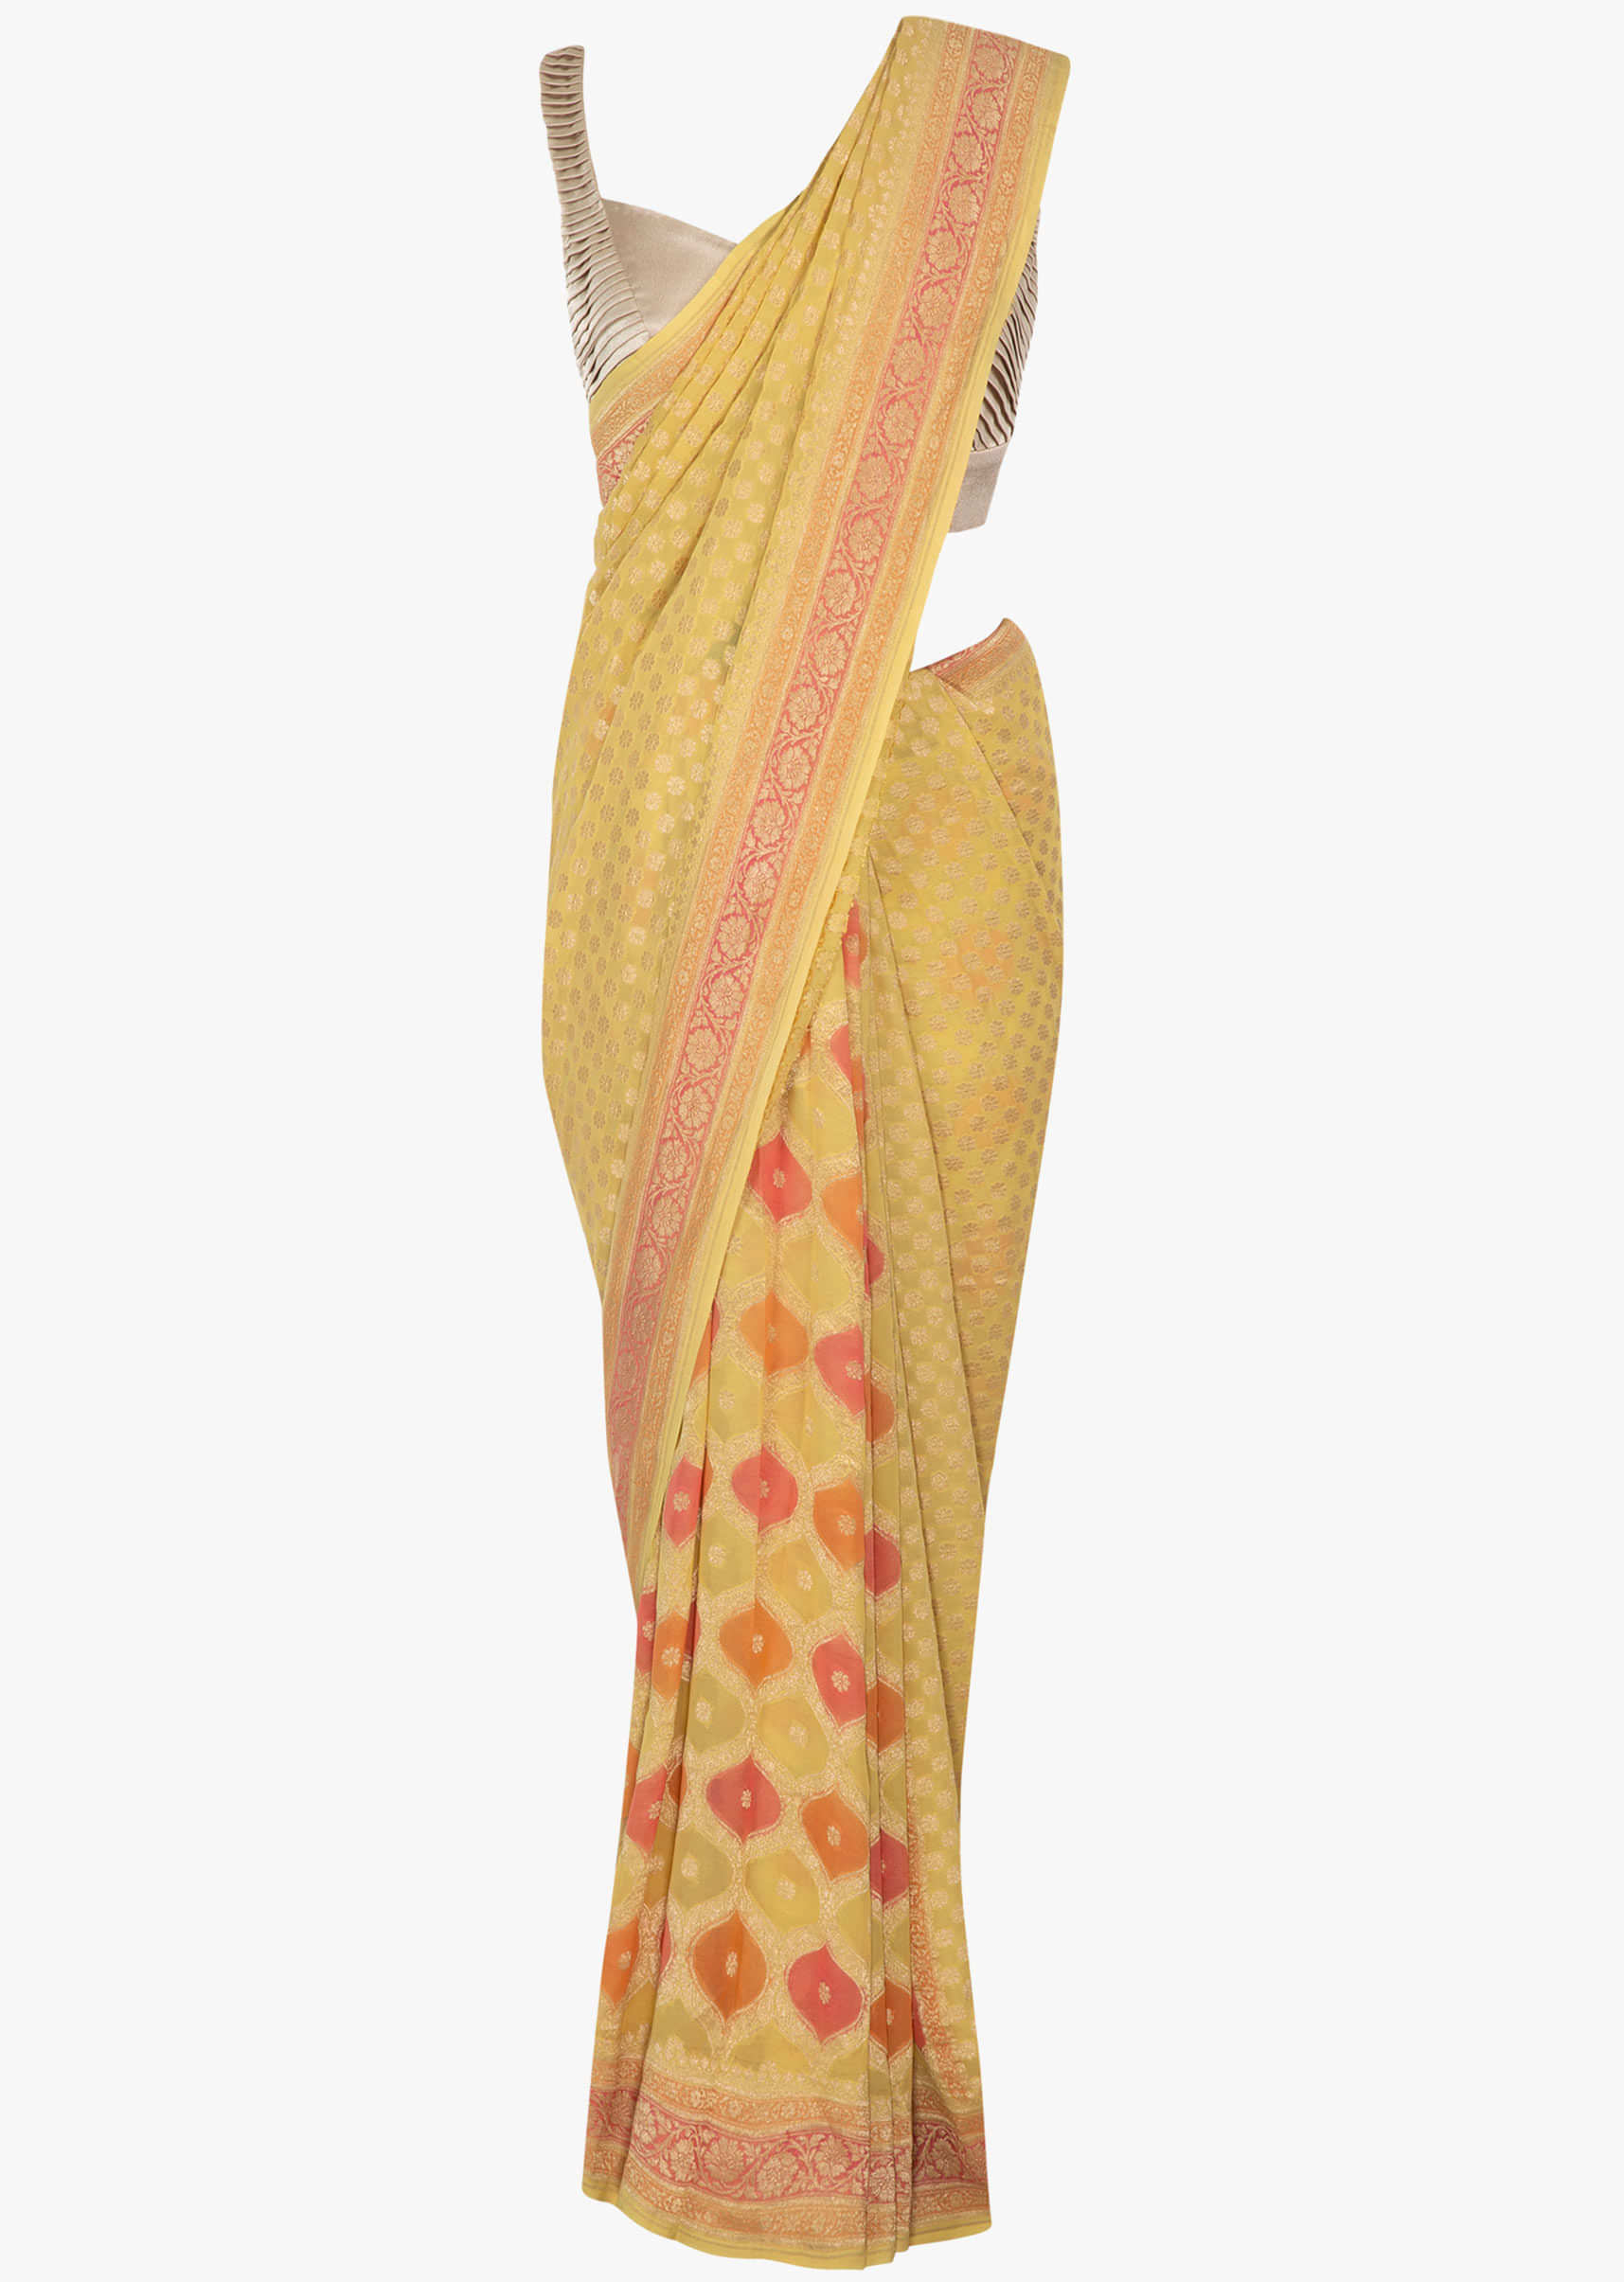 Tuscan sun yellow saree in geometric shapes highlighted in multiple colors 